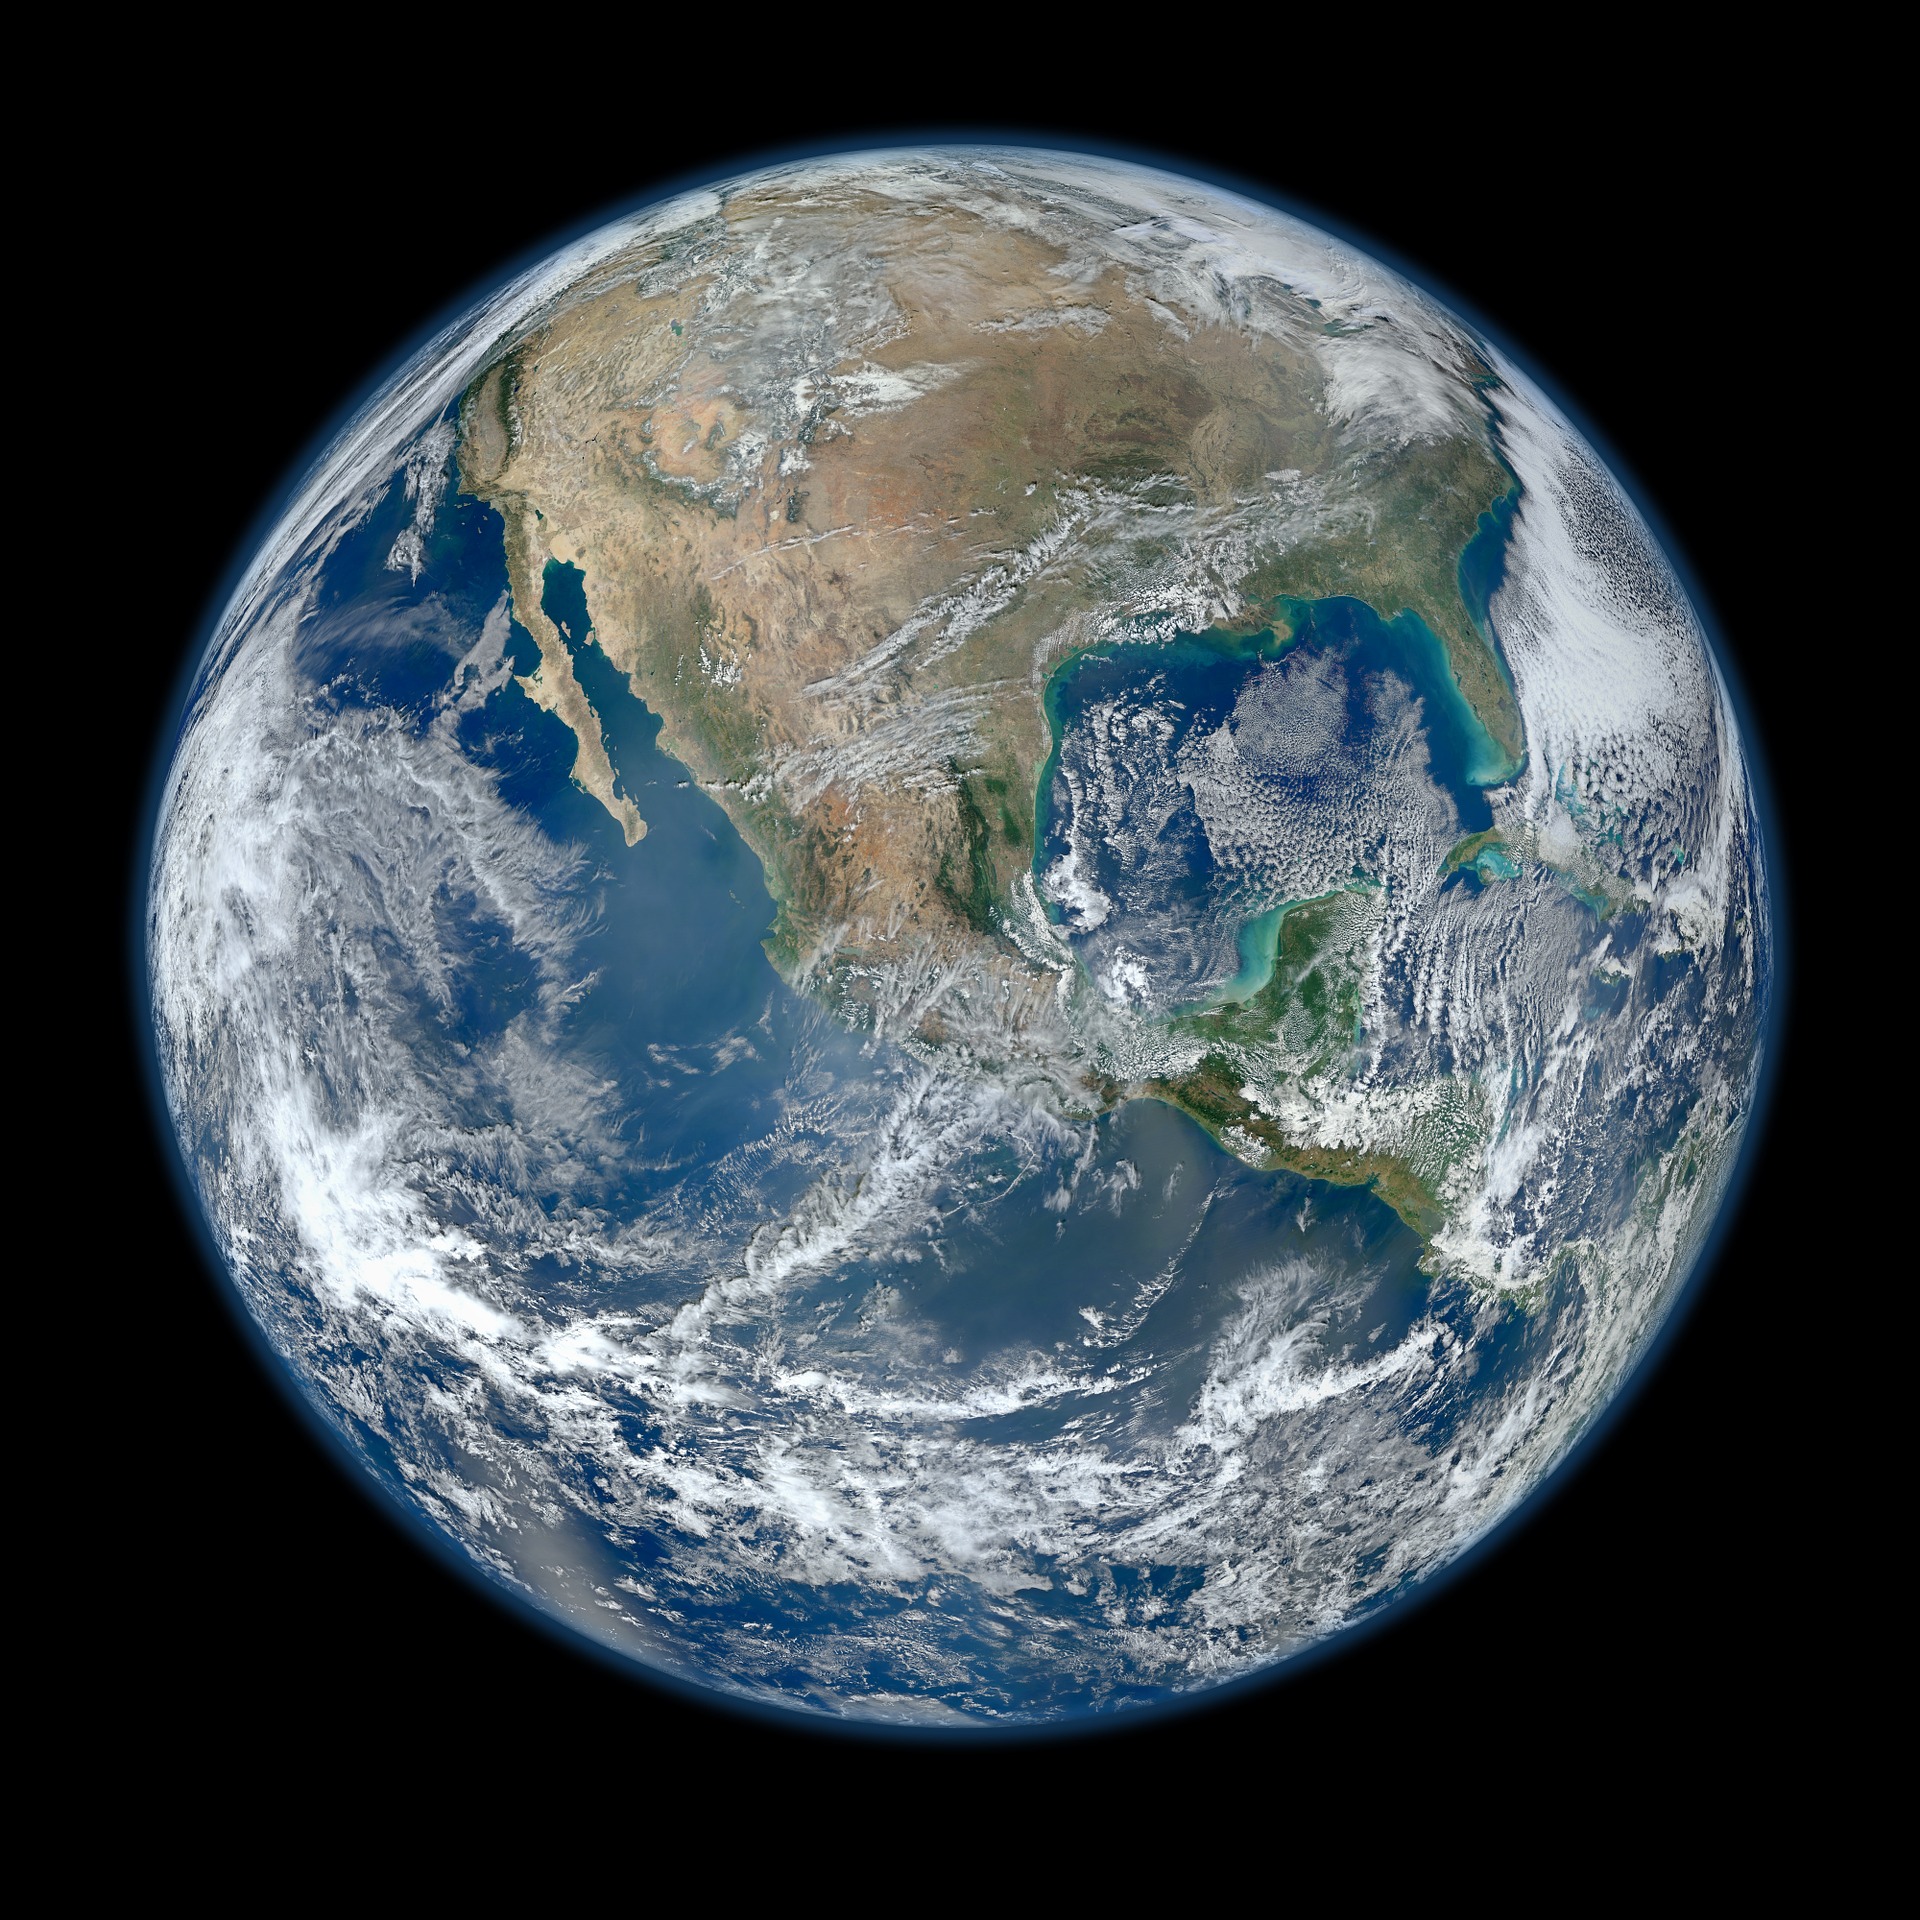 Image of the Earth